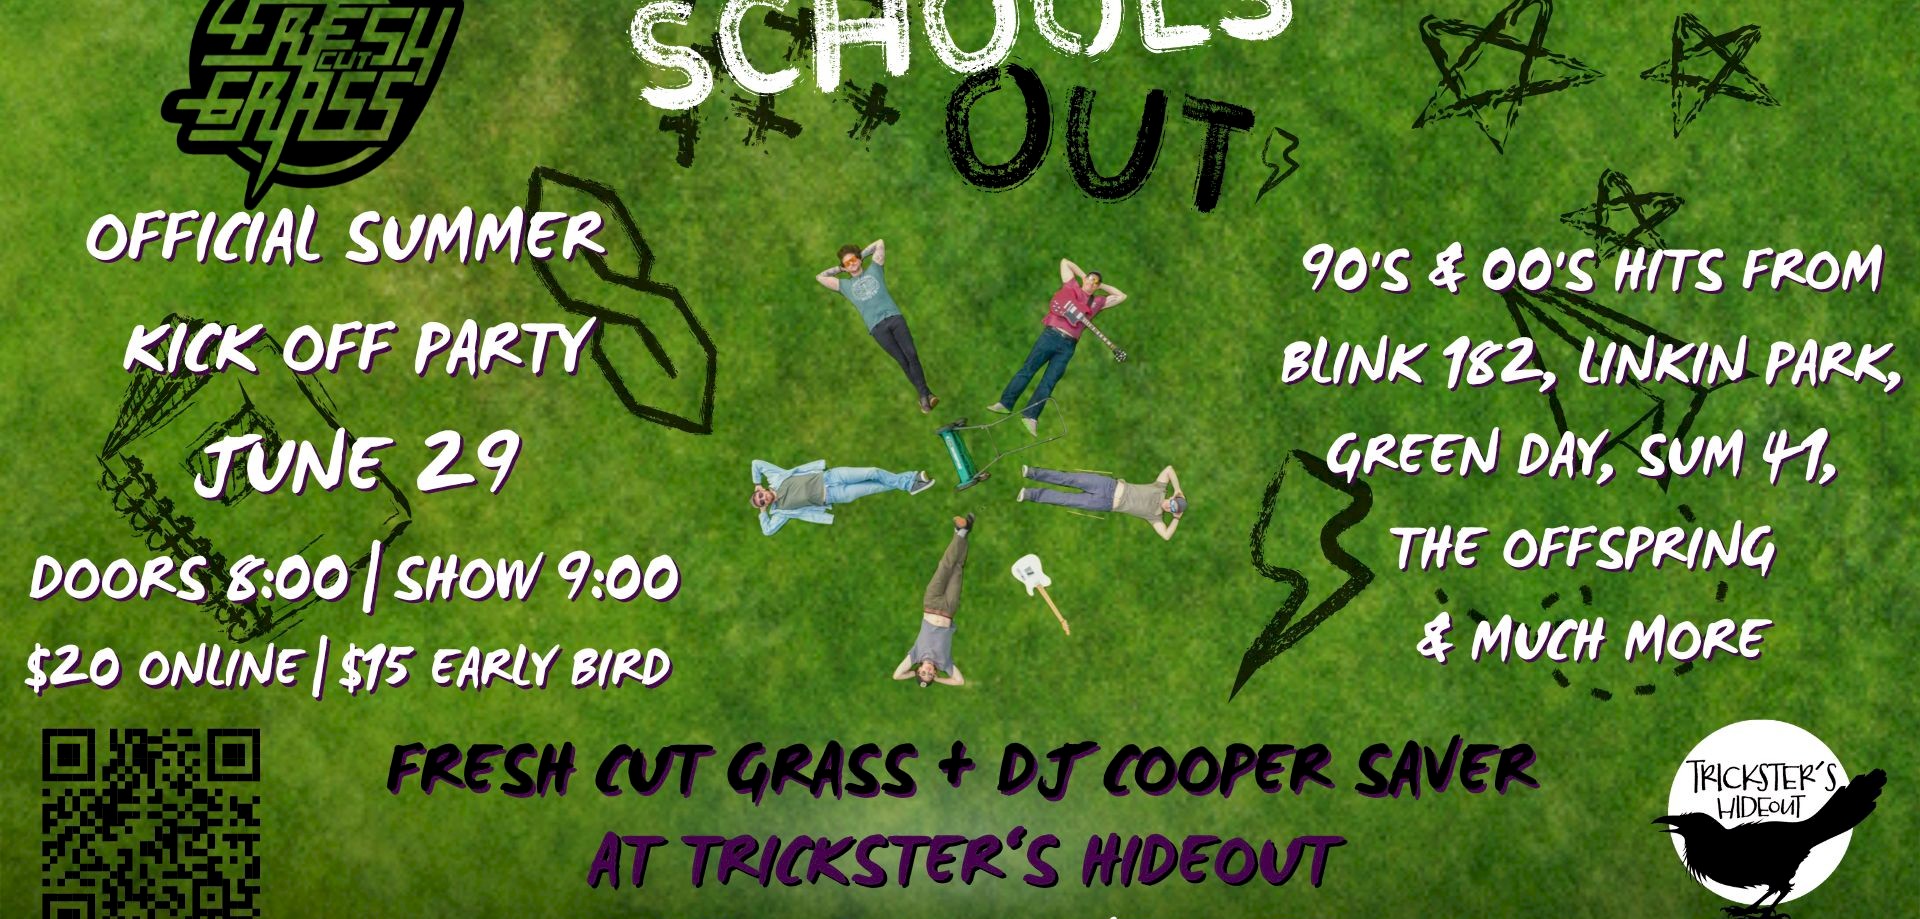 School's Out! Official Summer Kick Off Party